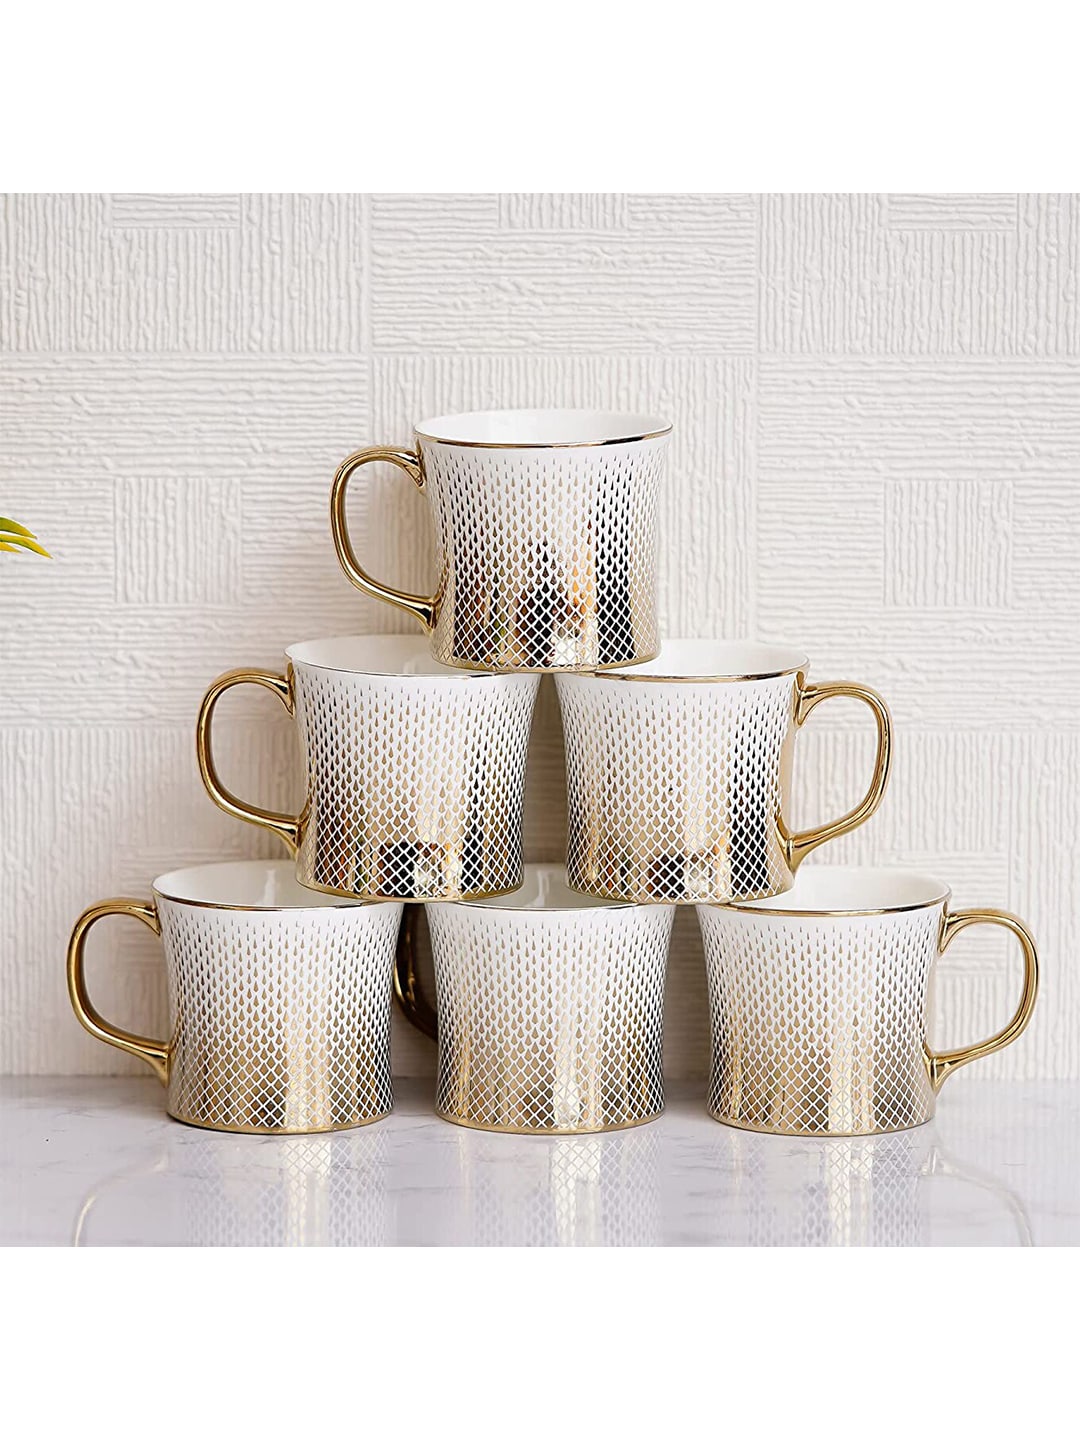 Femora Set-6 White & Gold-Toned Printed Bone China Glossy Cups and Mugs Price in India